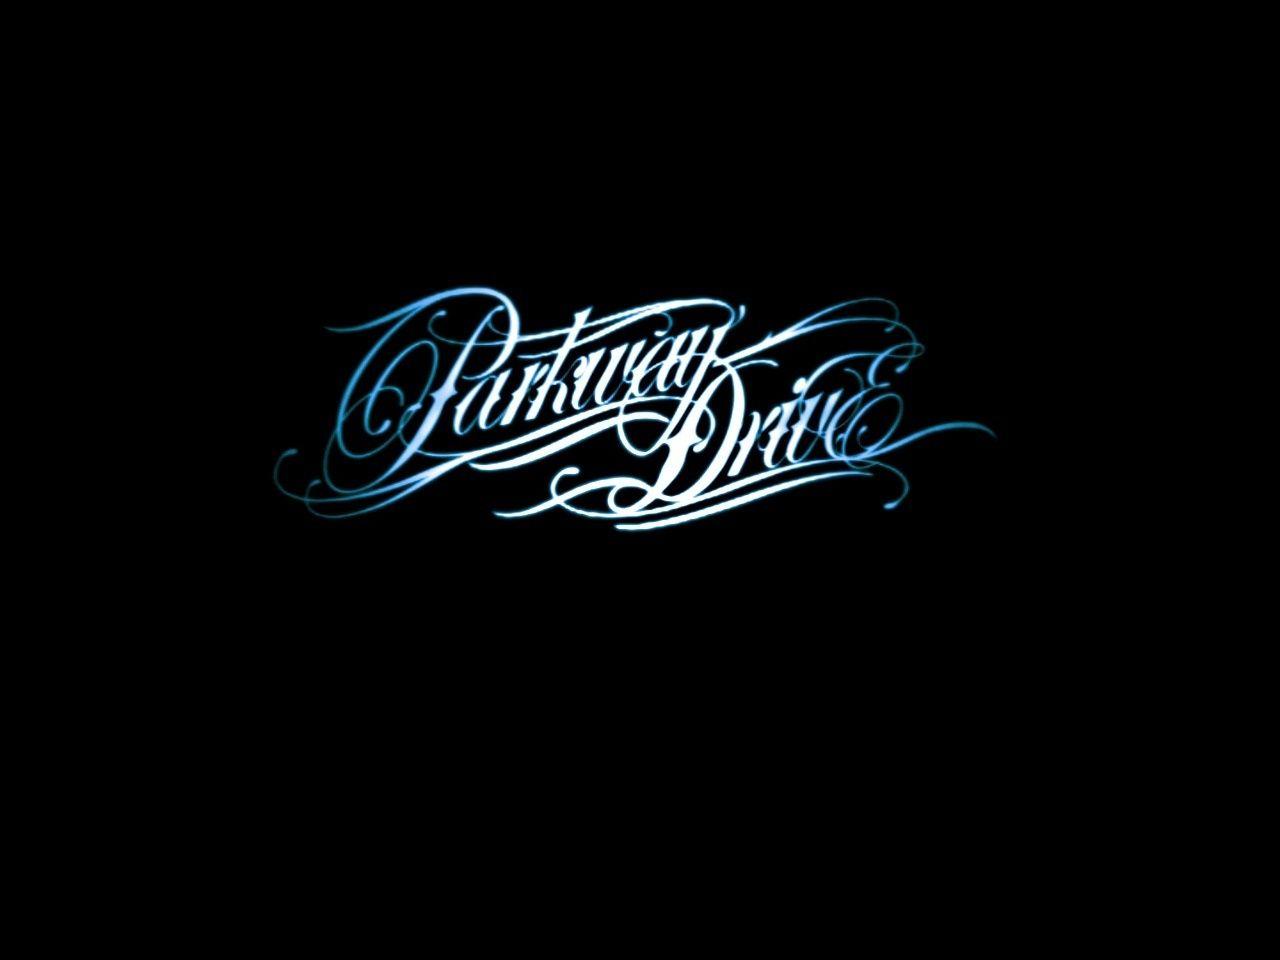 Parkway Drive image parkway drive HD wallpaper and background